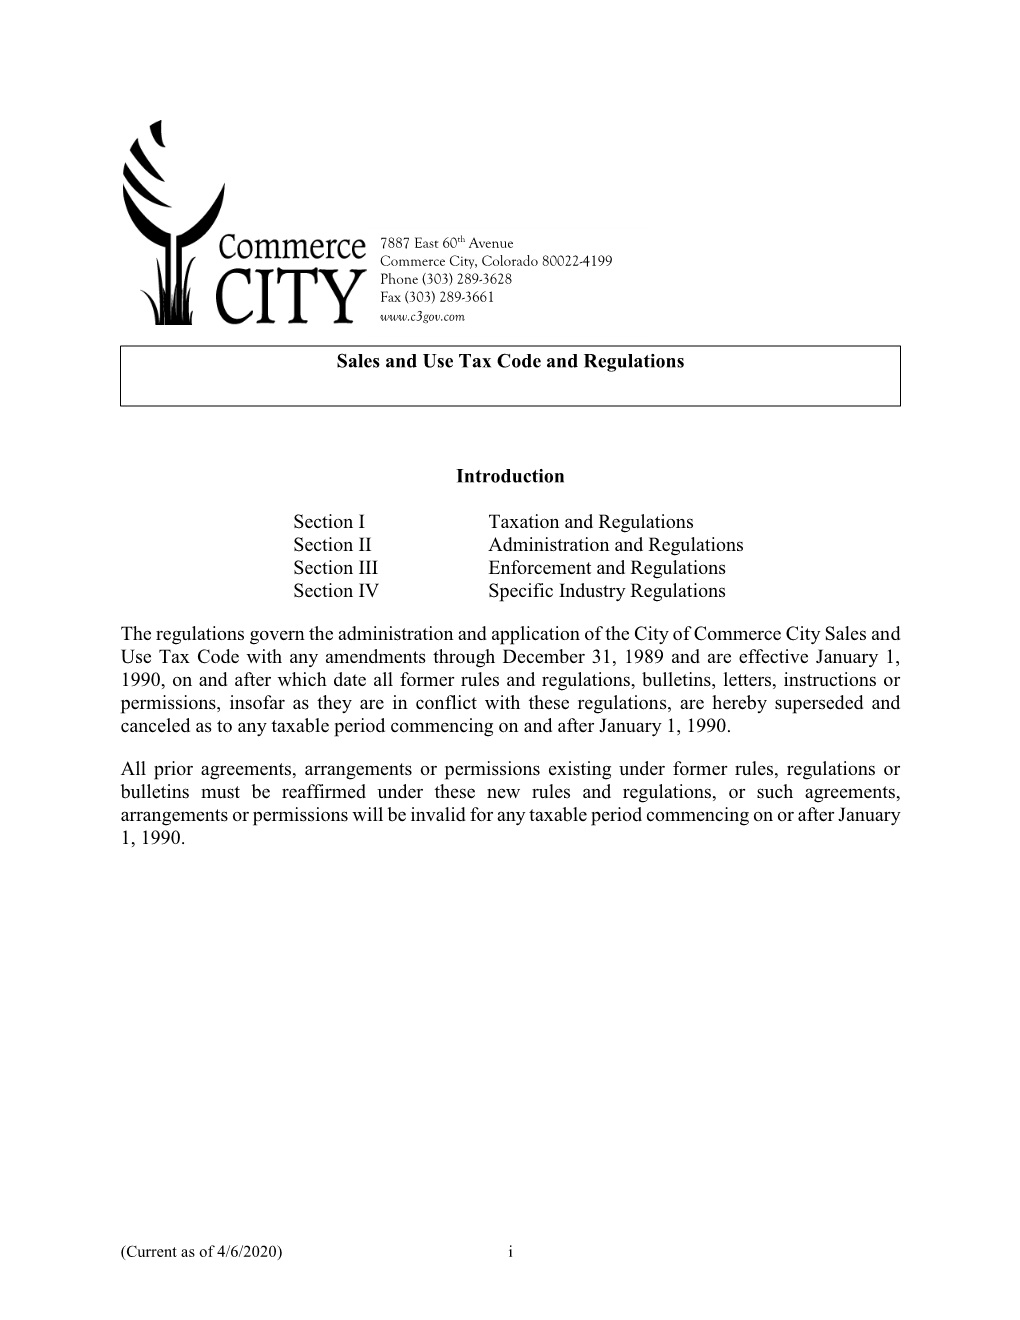 Commerce City Sales and Use Tax Code 20 Article I Taxation